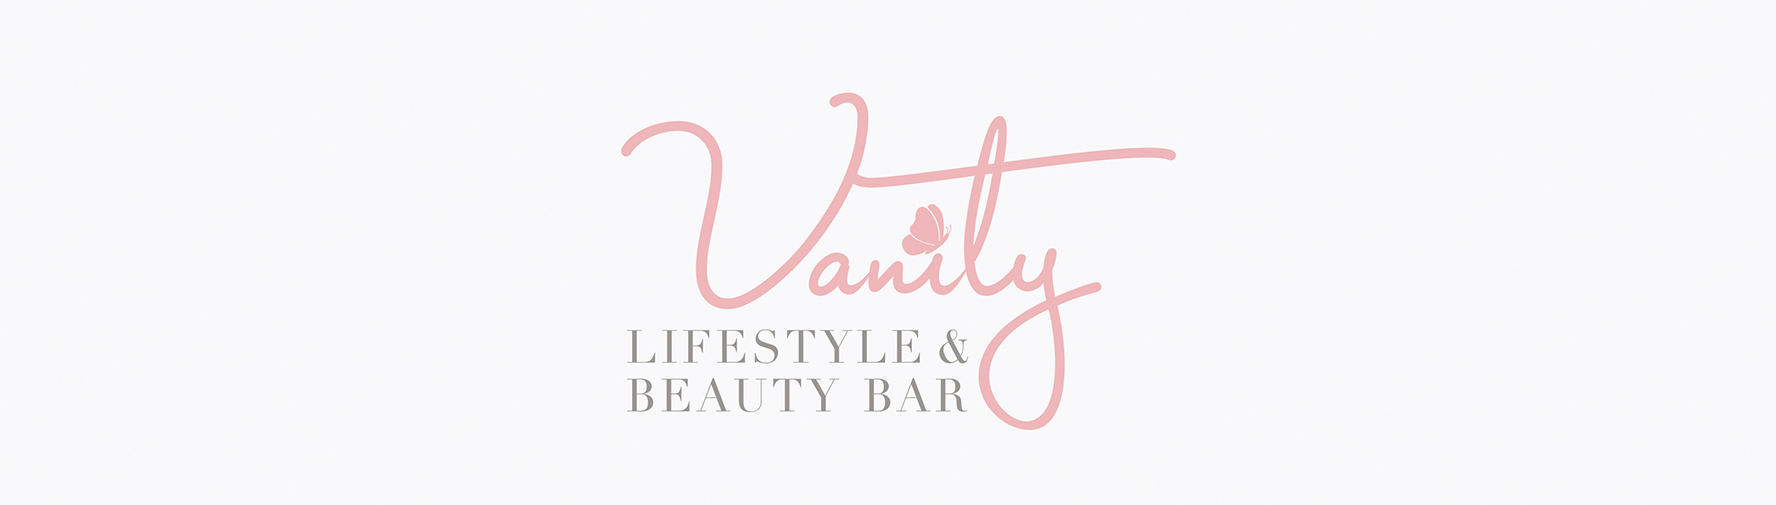 Vanity Lifestyle and Beauty Bar